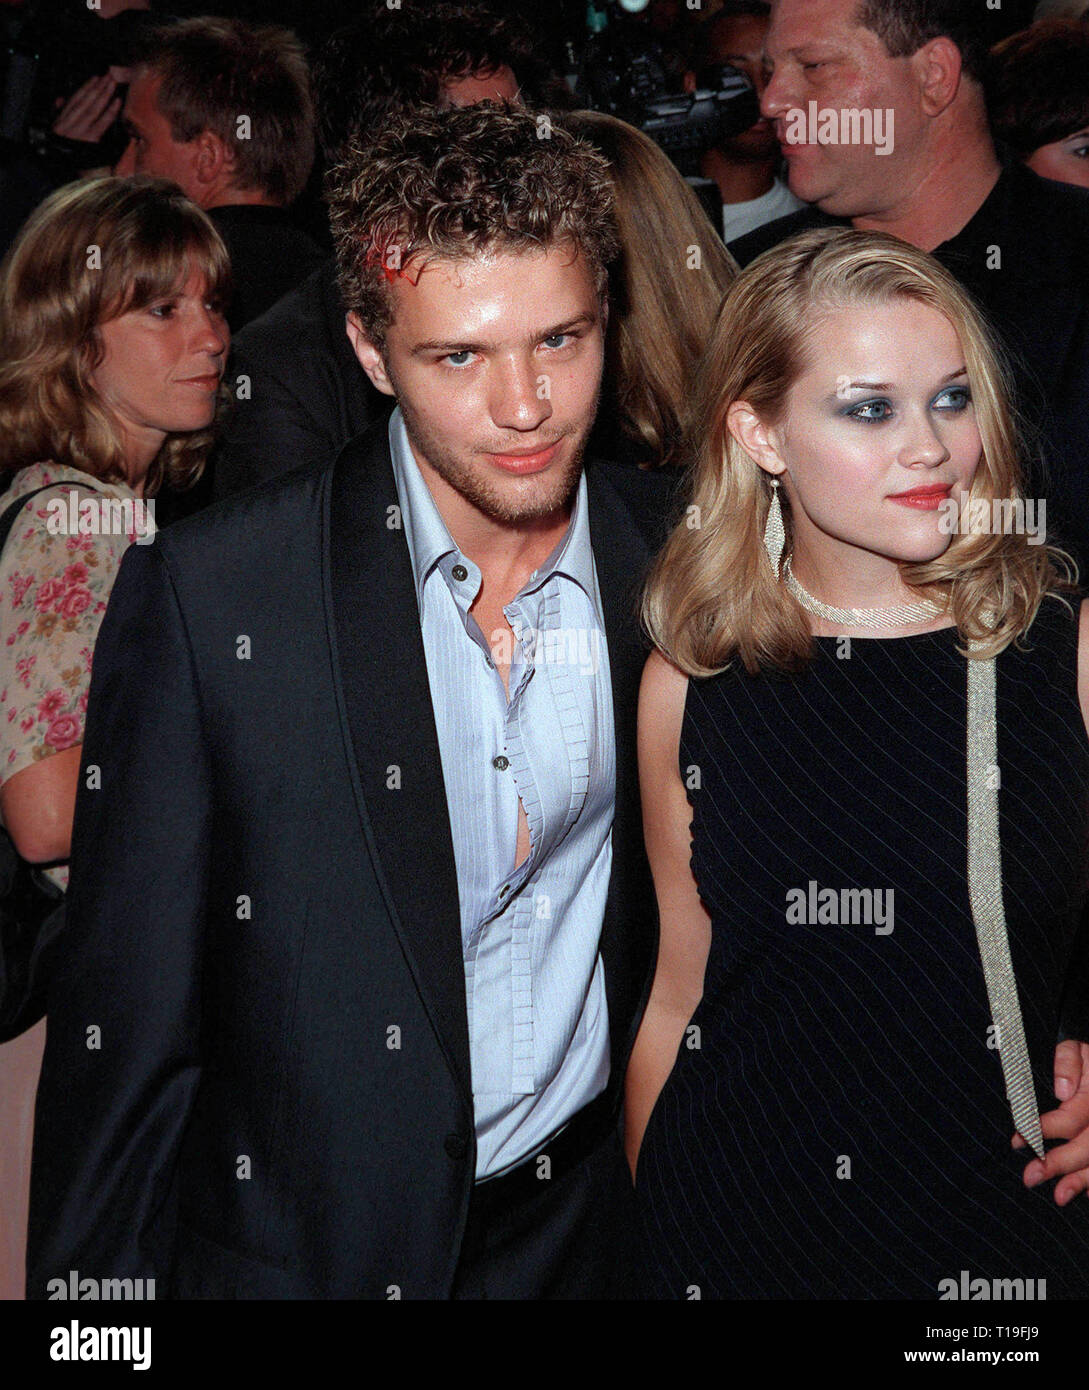 LOS ANGELES, CA - August 24, 1998: Actor RYAN PHILLIPPE & actress girlfriend REESE WITHERSPOON at the world premiere, in Hollywood, of '54.' The movie is based on New York's Studio 54 Disco. Stock Photo